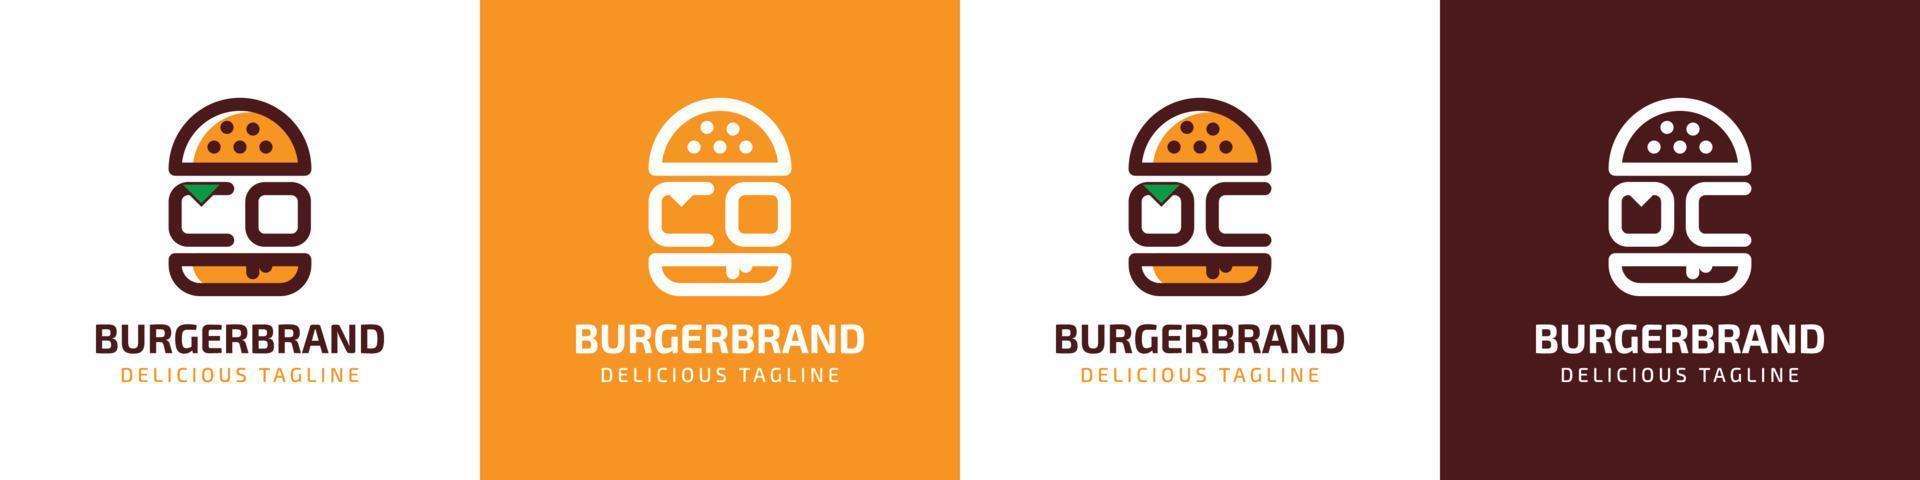 Letter CO and OC Burger Logo, suitable for any business related to burger with CO or OC initials. vector